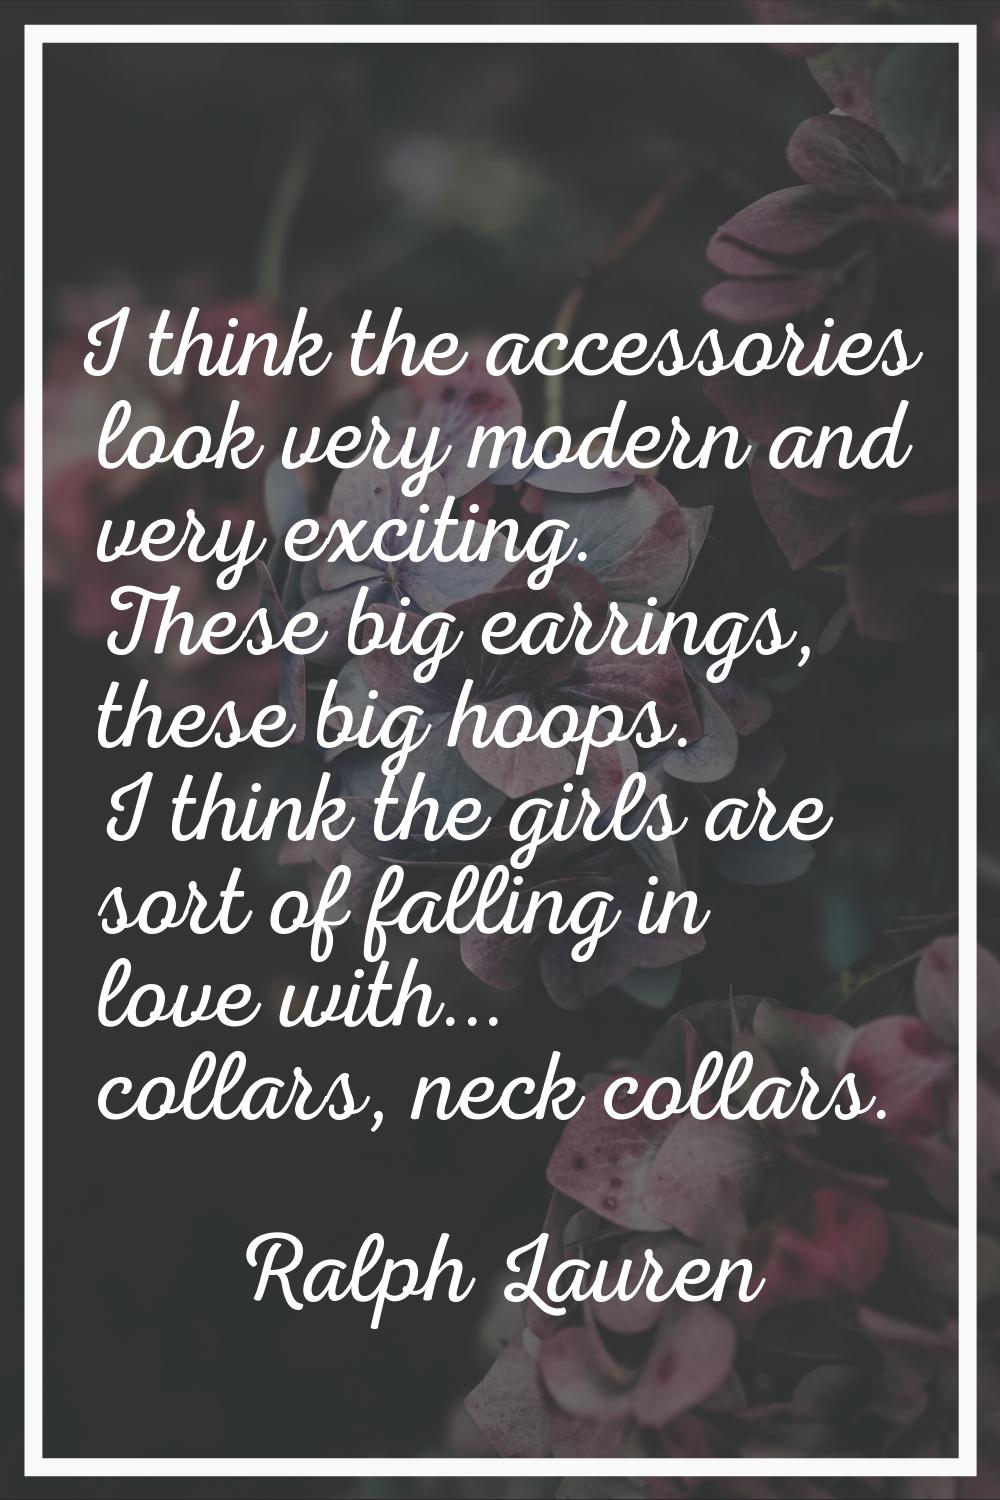 I think the accessories look very modern and very exciting. These big earrings, these big hoops. I 